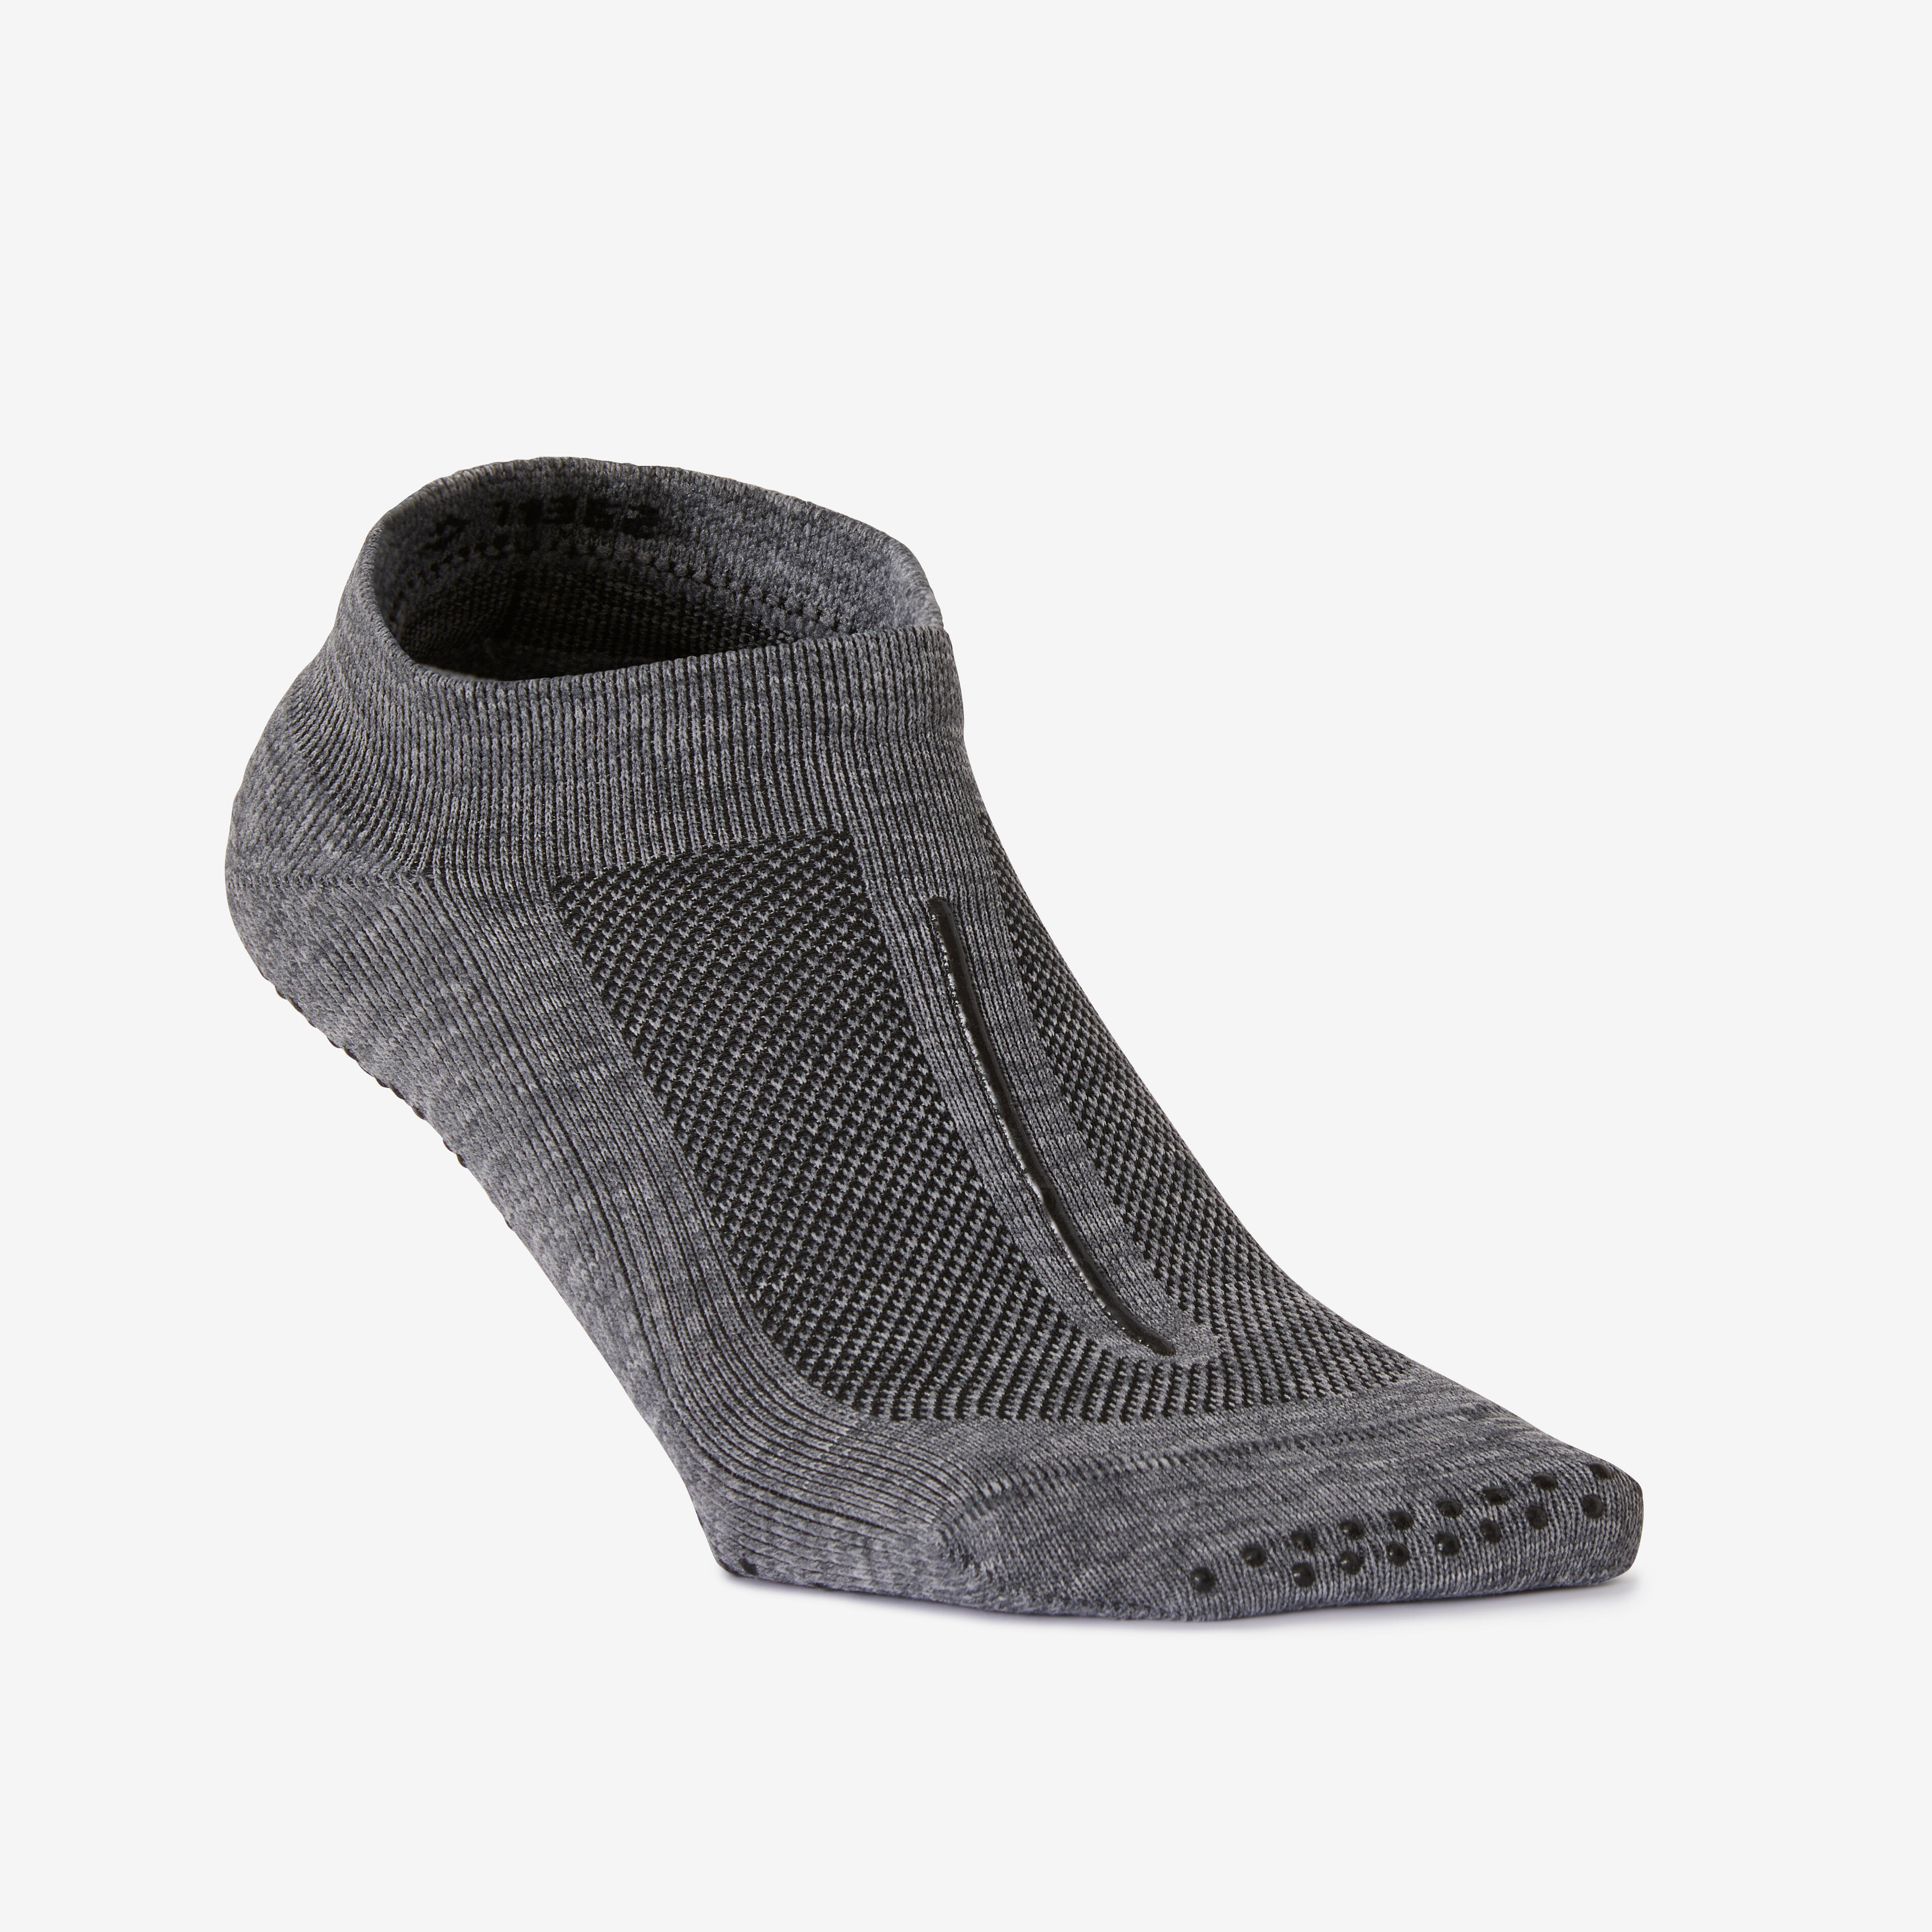 chaussettes antidérapantes fitness femme - 500 gris - domyos